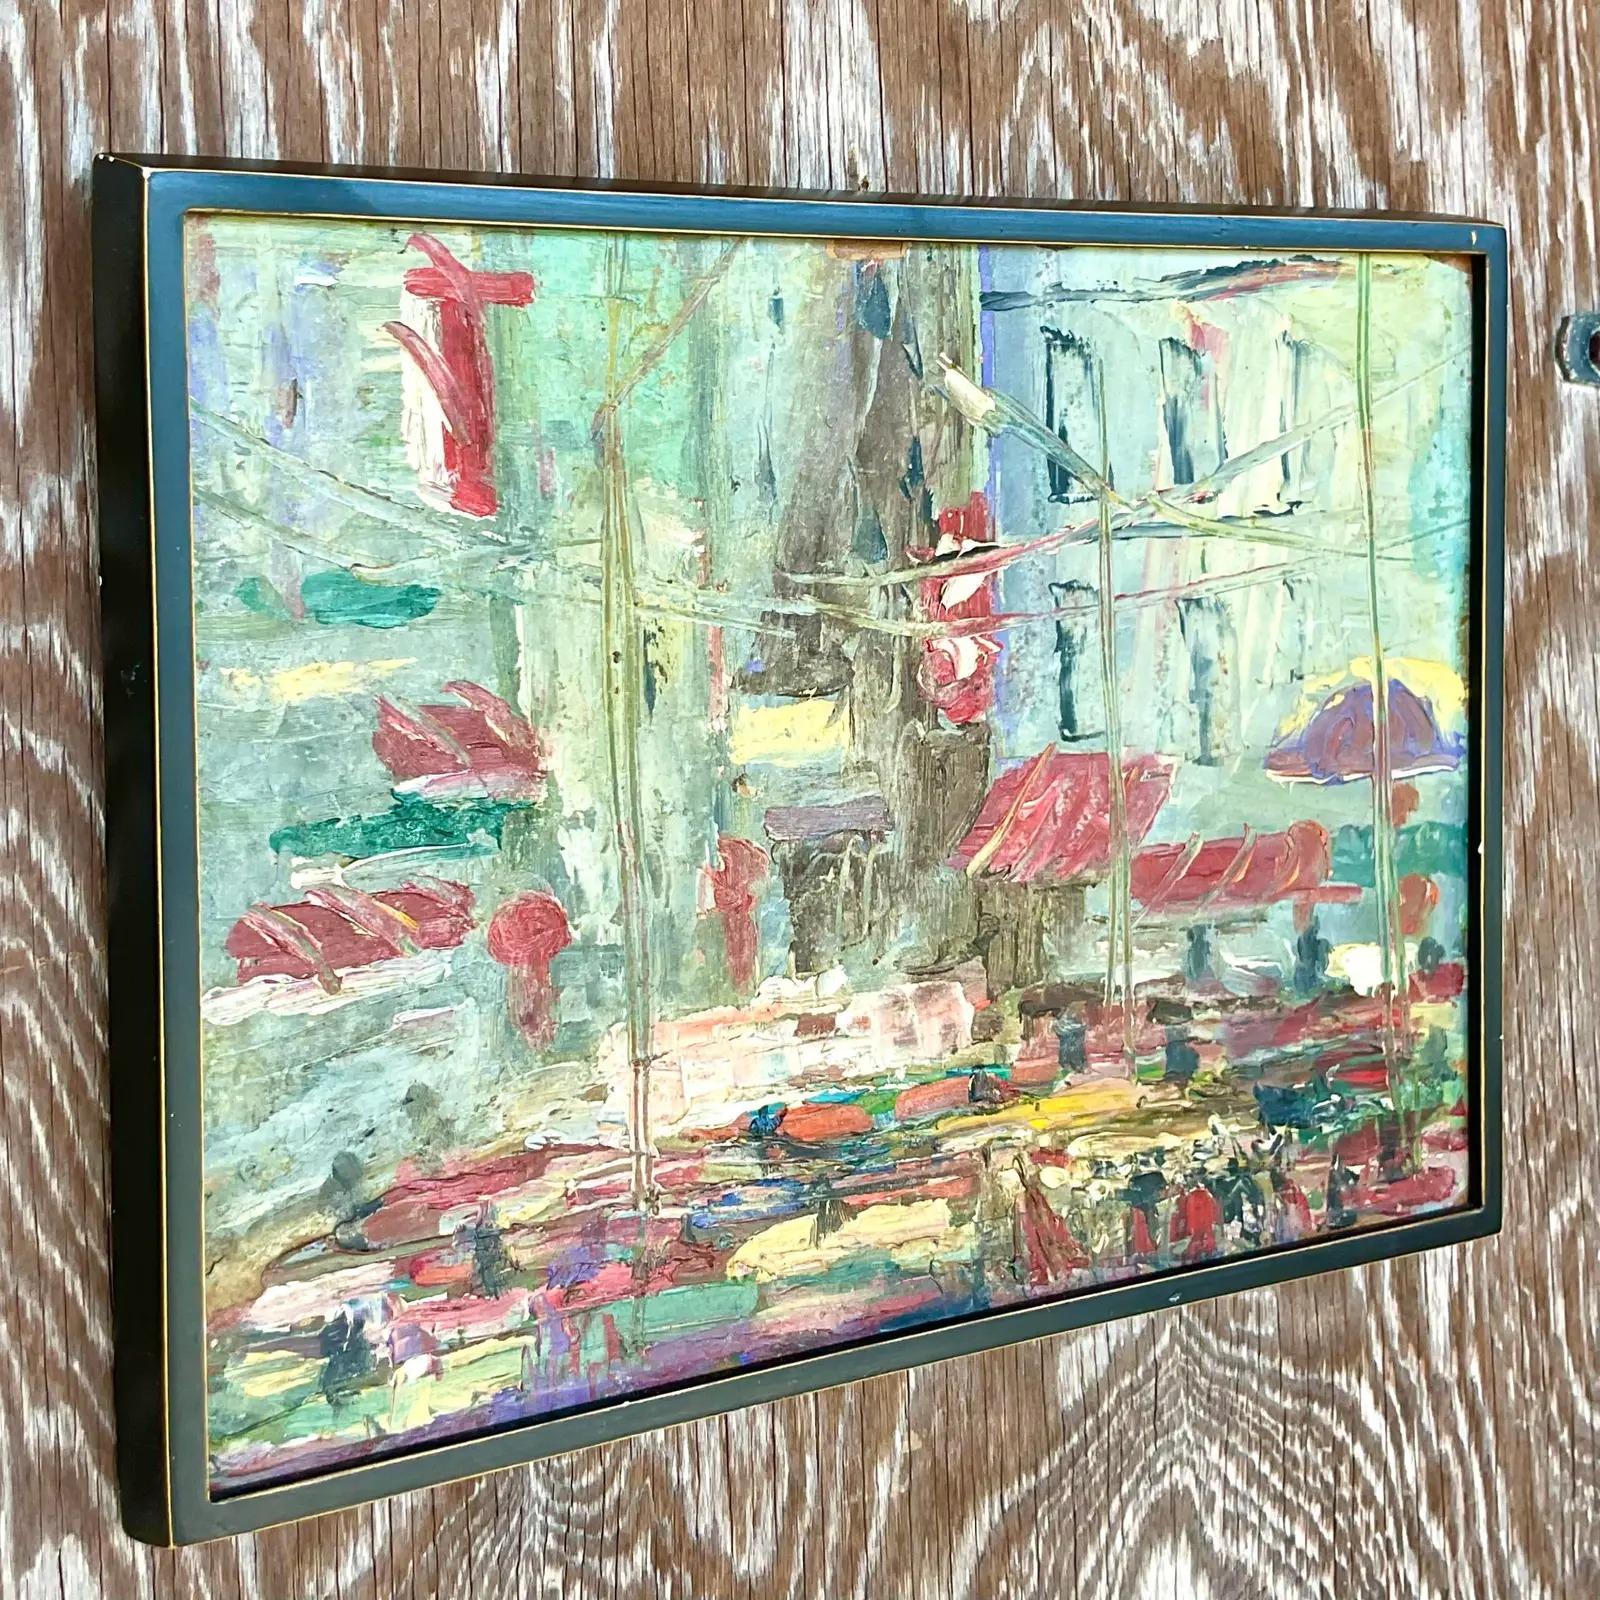 North American Vintage Boho Original Oil Impasto Abstract Expressionist Painting For Sale